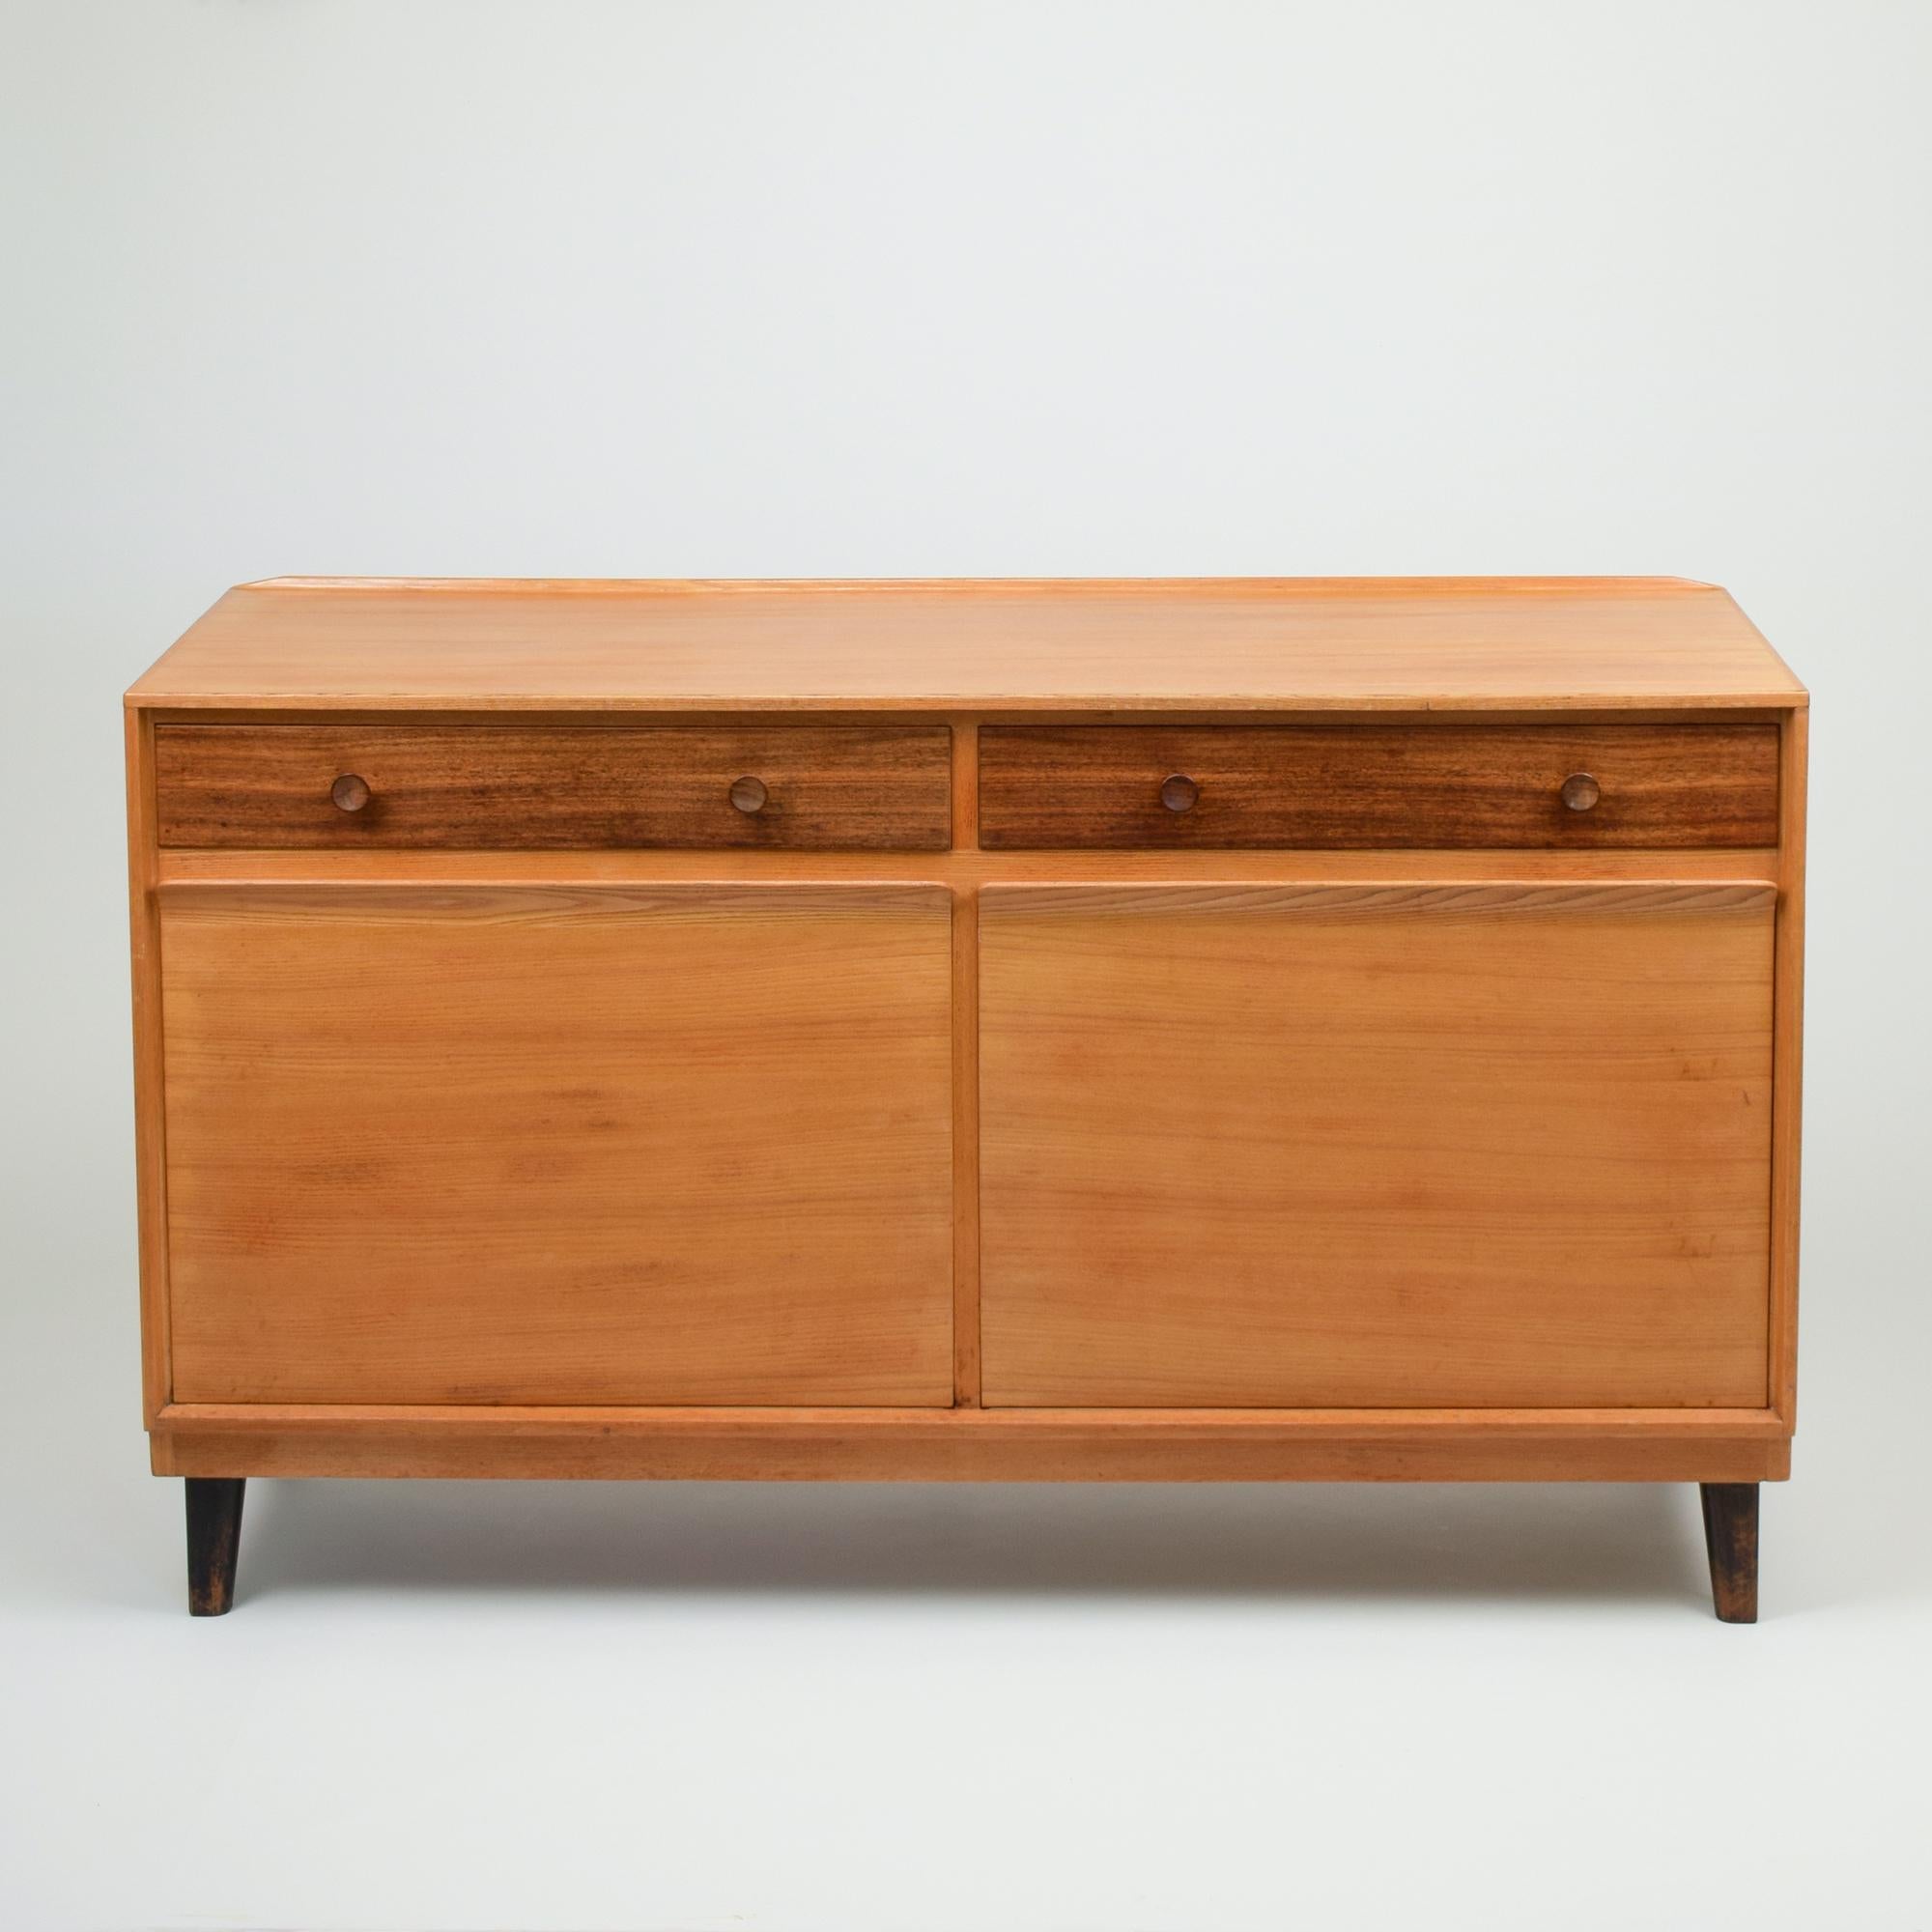 Richard Drew Russell (designer), 1958
Gordon Russell, UK (manufacturer)
Sideboard
Bombay rosewood and Japanese elm
Two drawers above cupboard with pull-down doors and adjustable shelves
Manufacturer's metal label to rear and supplier's plastic